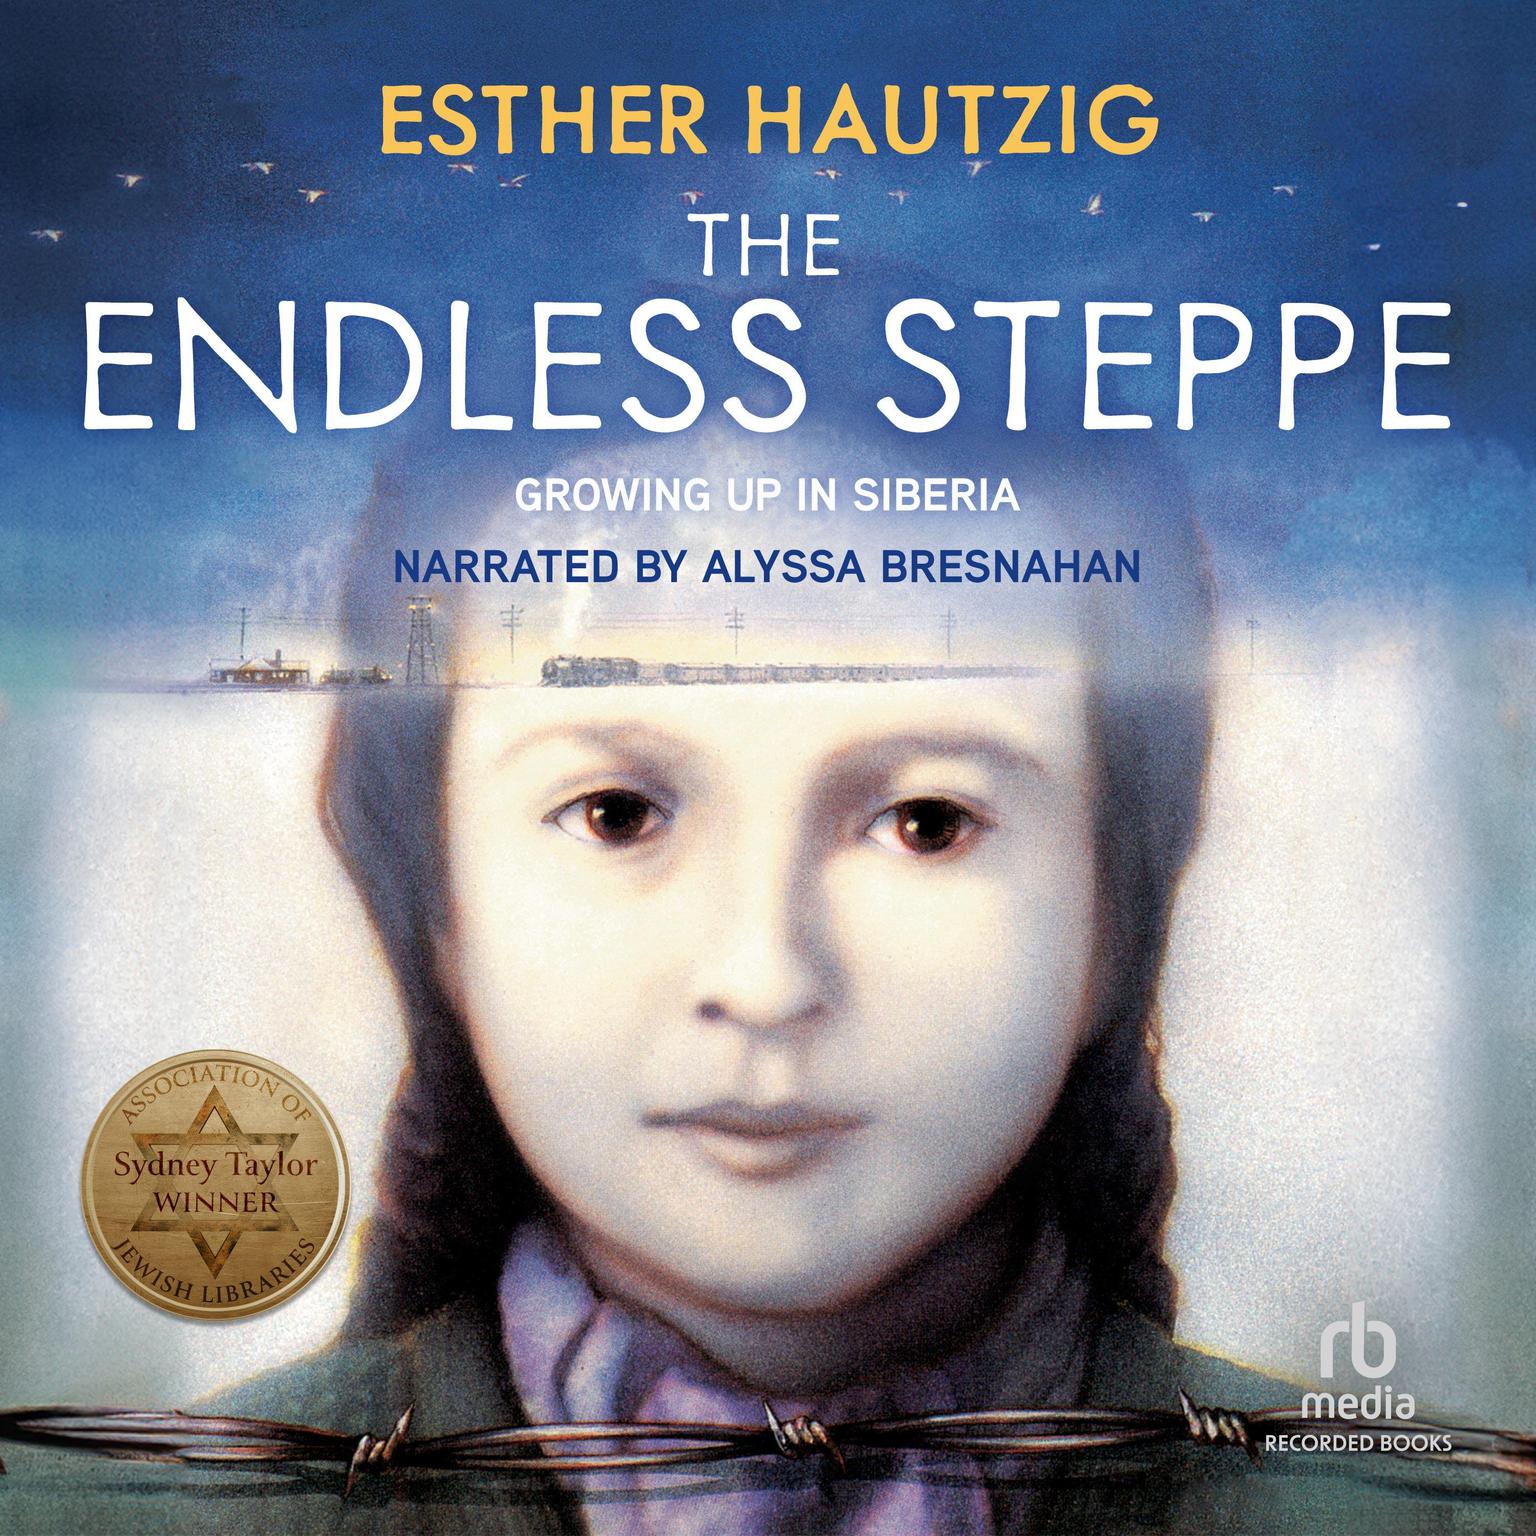 The Endless Steppe: Growing Up in Siberia Audiobook, by Esther Hautzig